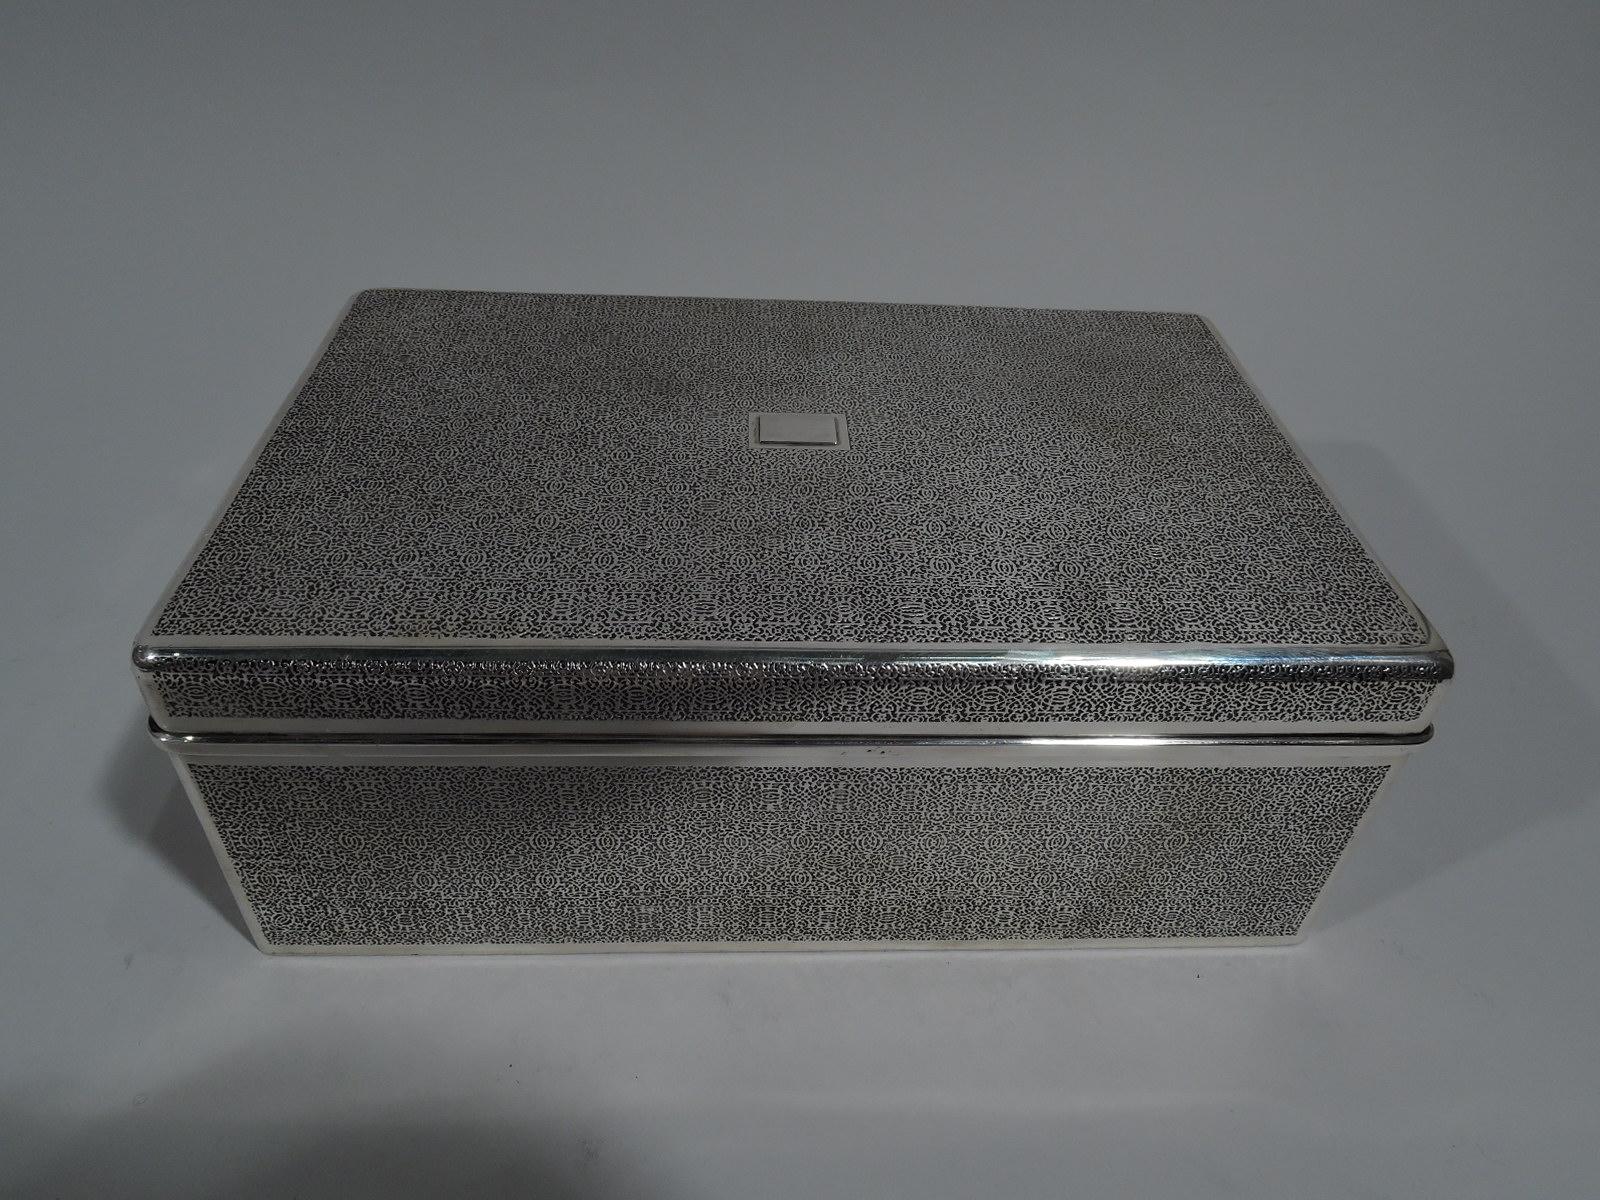 Large sterling silver box. Made by Tiffany & Co. in New York, circa 1927. Rectangular with straight sides and curved corners. Cover flat and hinged with molded rim. Fine and dense acid-etched all-over scrollwork mesh, a wonderful lacy pattern. Box